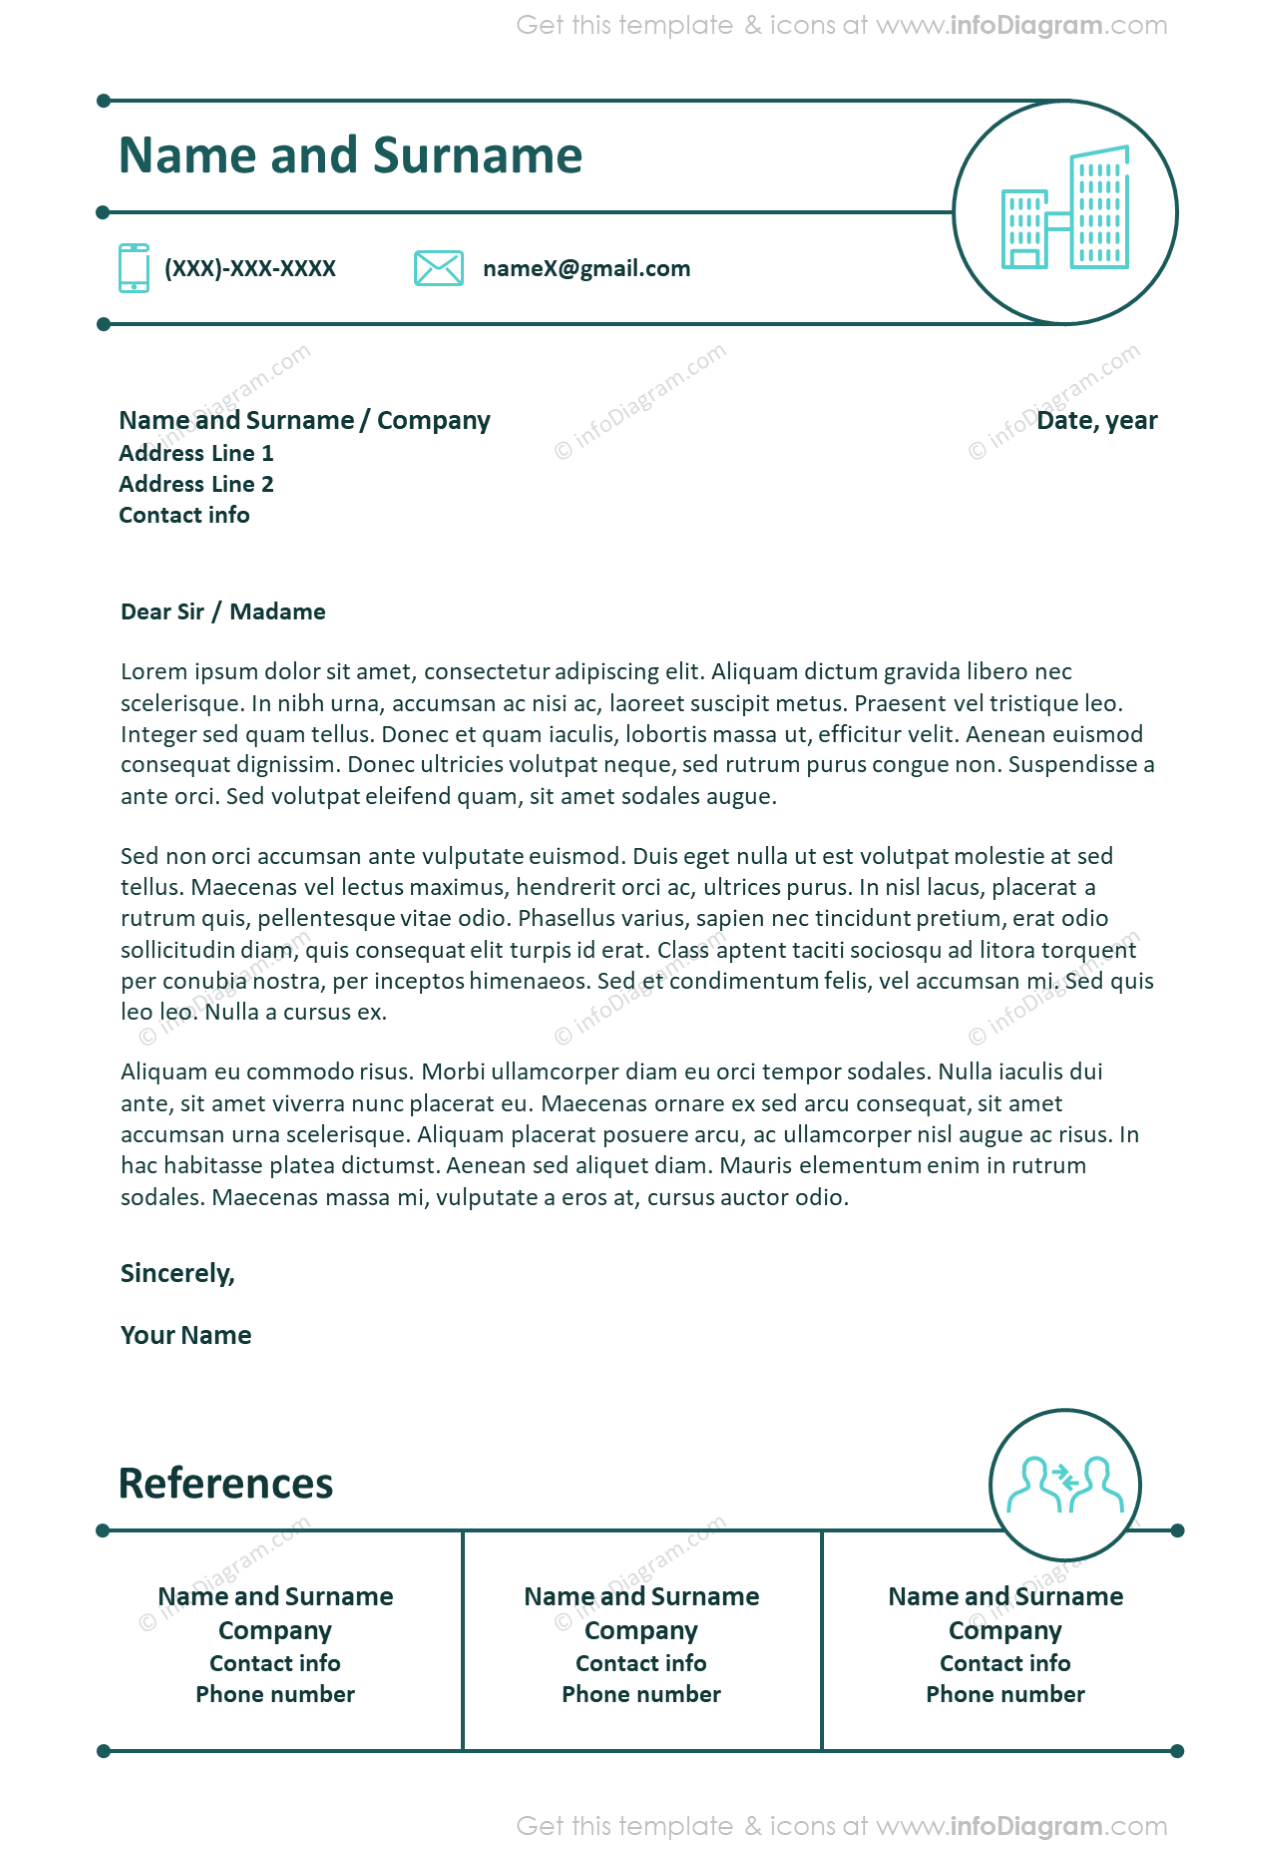 Creative outline personal cover letter with references 